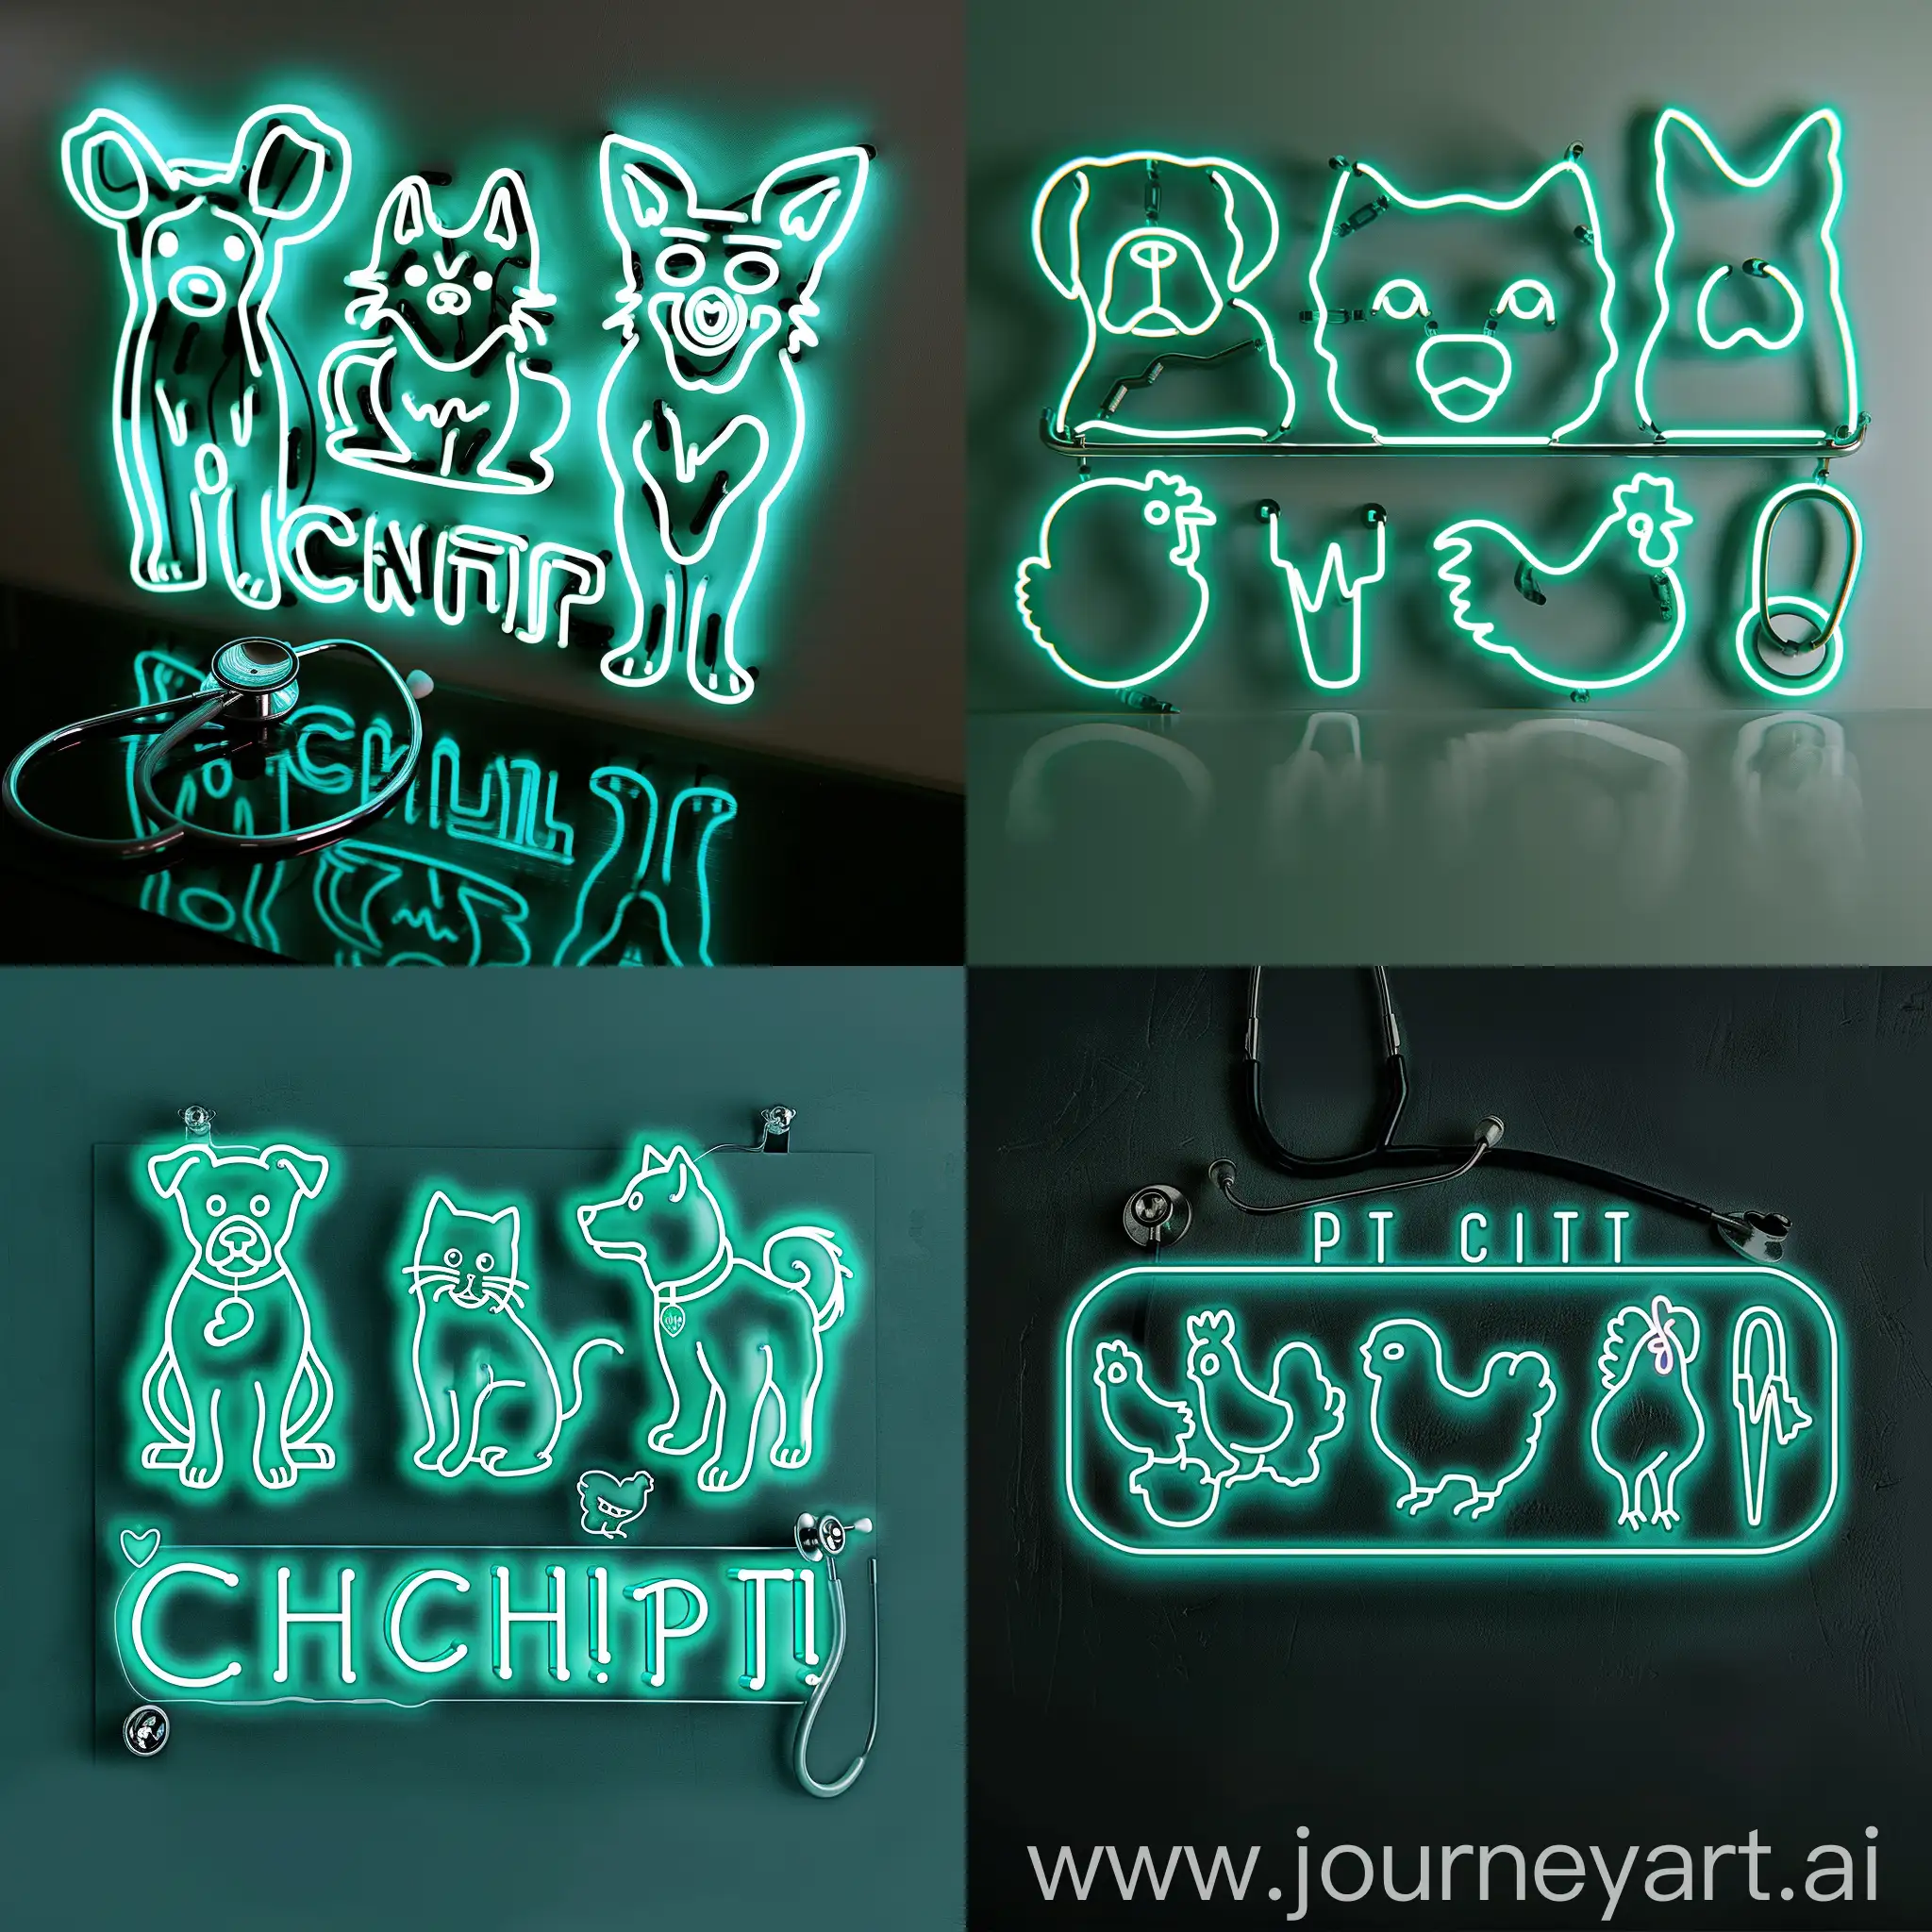 Turquoise-Neon-Pet-Clinic-Banner-with-Dog-Cat-Chicken-Shapes-and-Stethoscope